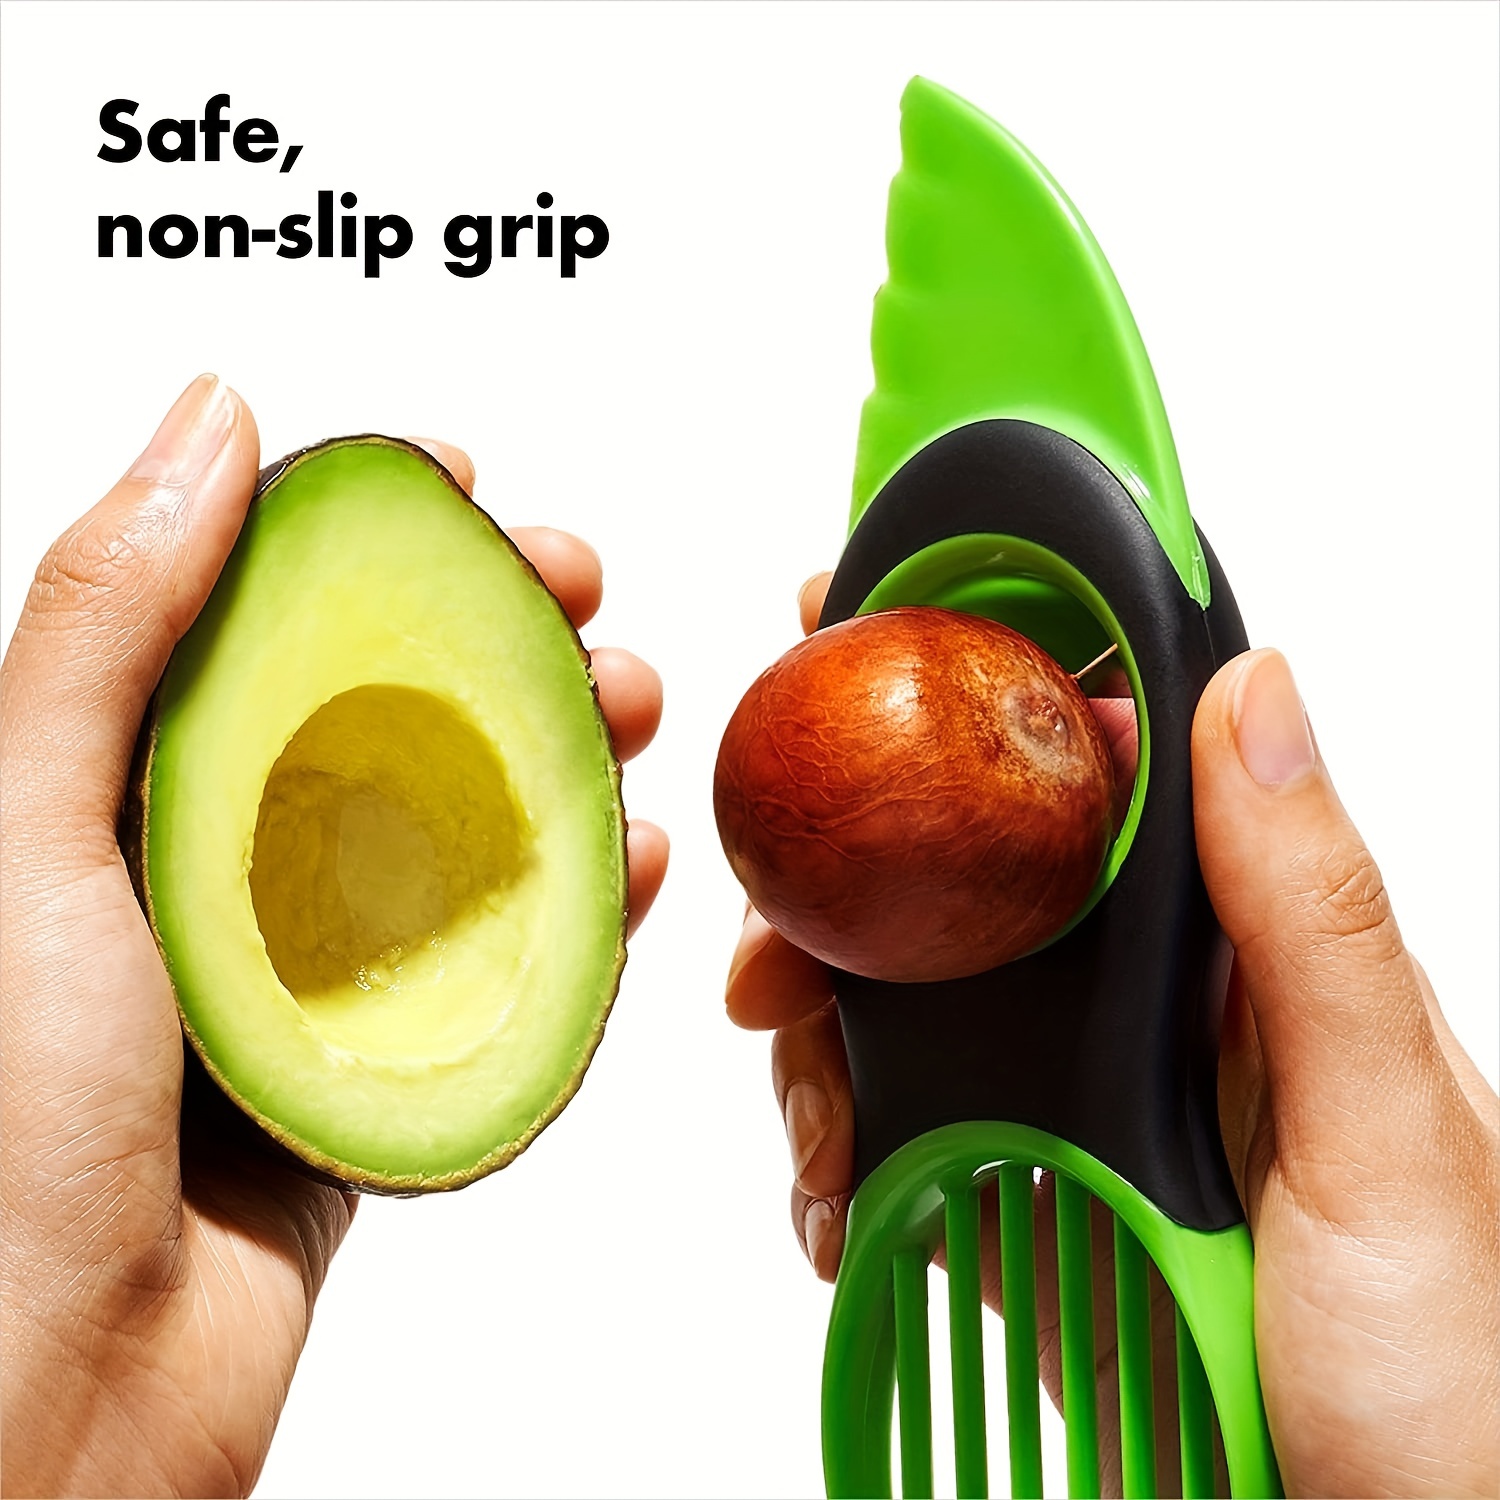 Dotala 3 in 1 Avocado Slicer Tool and Saver Keeper,Avocado Pit Remover and  Cutter as knife peeler scoop with Comfort-Grip Handle (Green-(Slicer+Saver))  - Yahoo Shopping